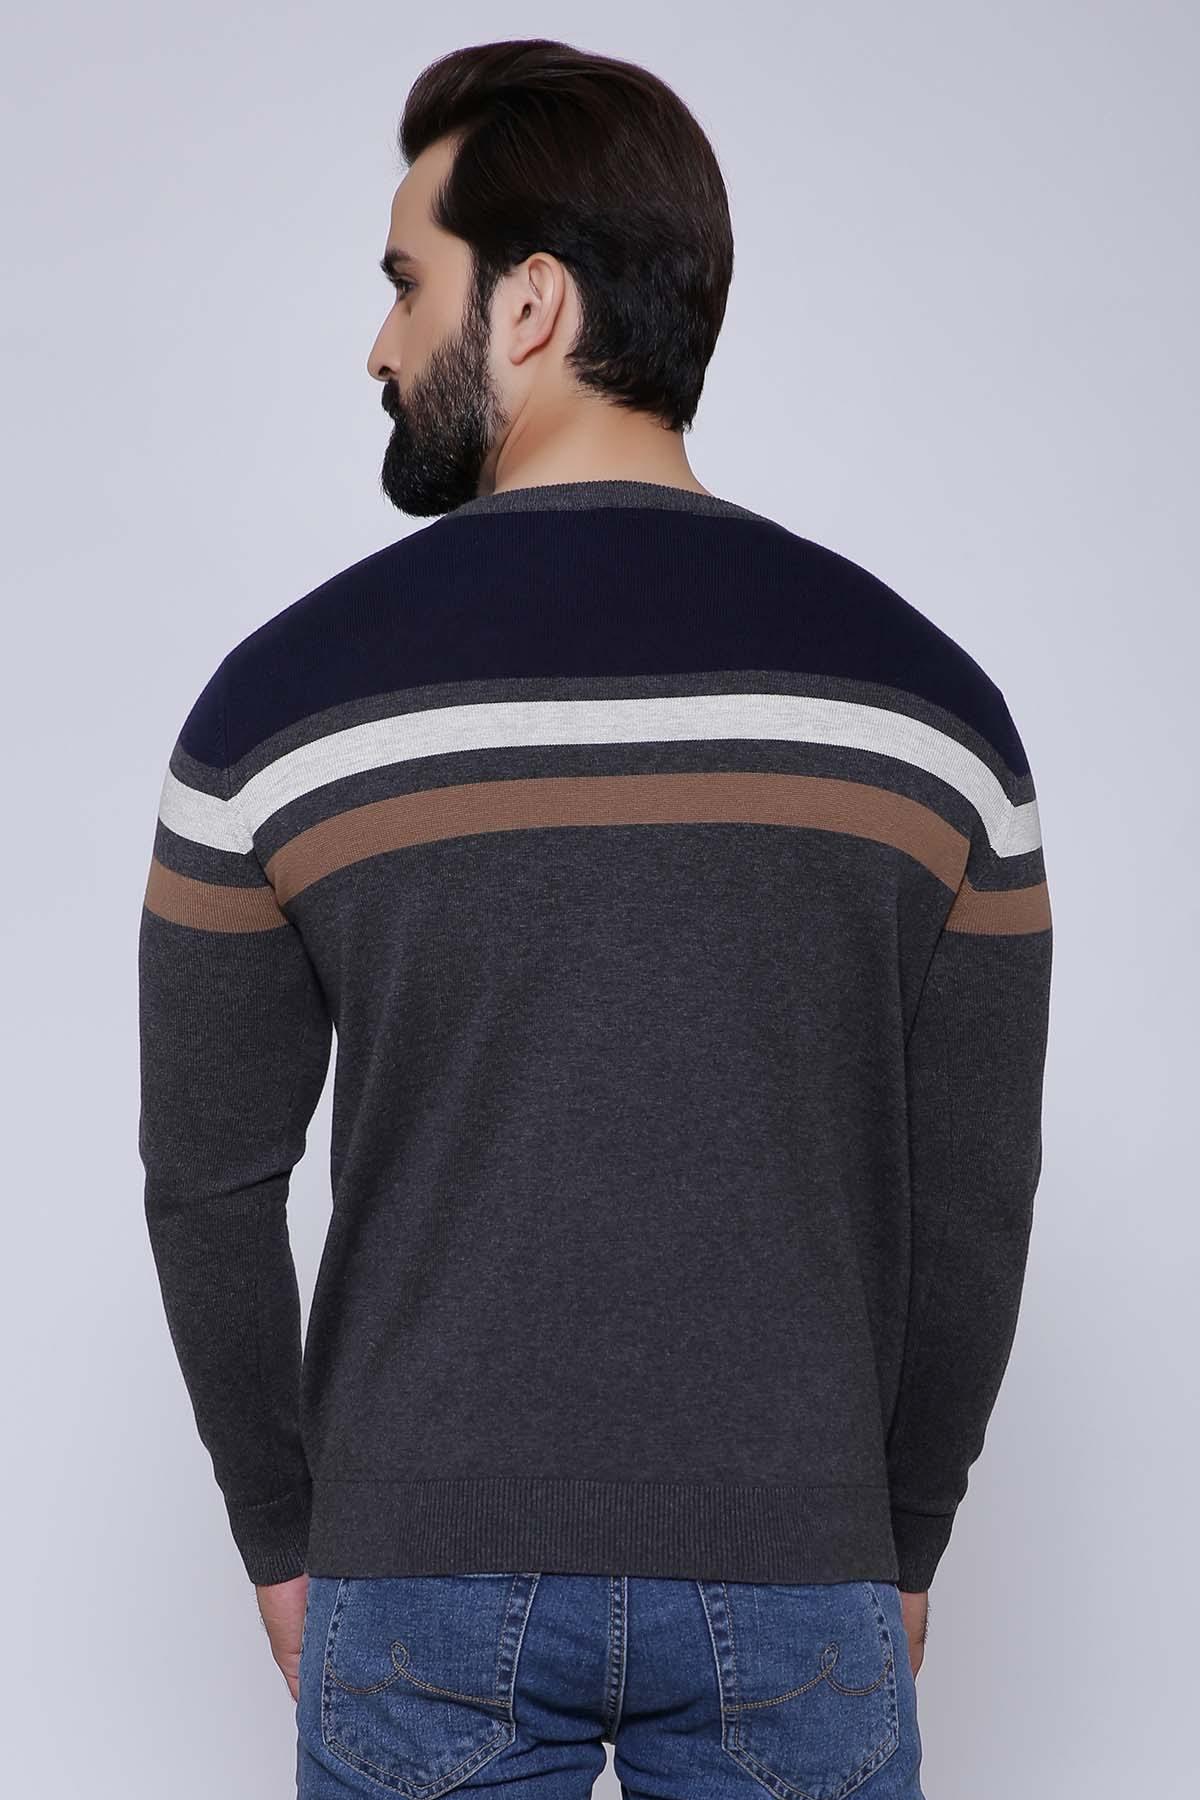 SWEATER ROUND NECK FULL SLEEVE DARK GREY at Charcoal Clothing